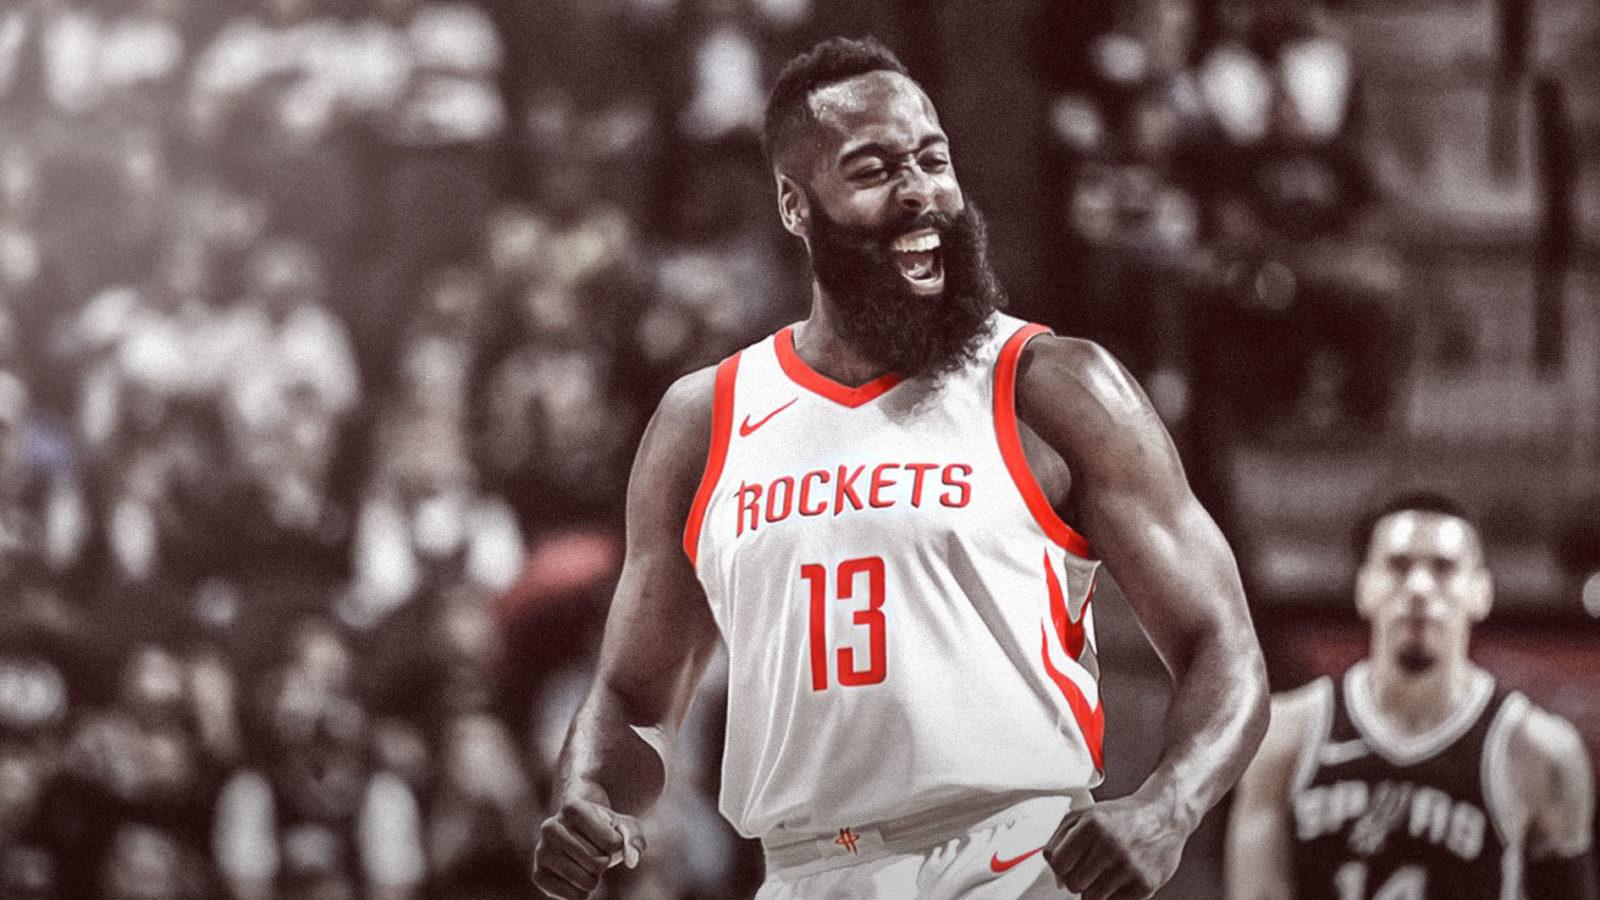 New James Harden Wallpaper. Download High Quality HD Image